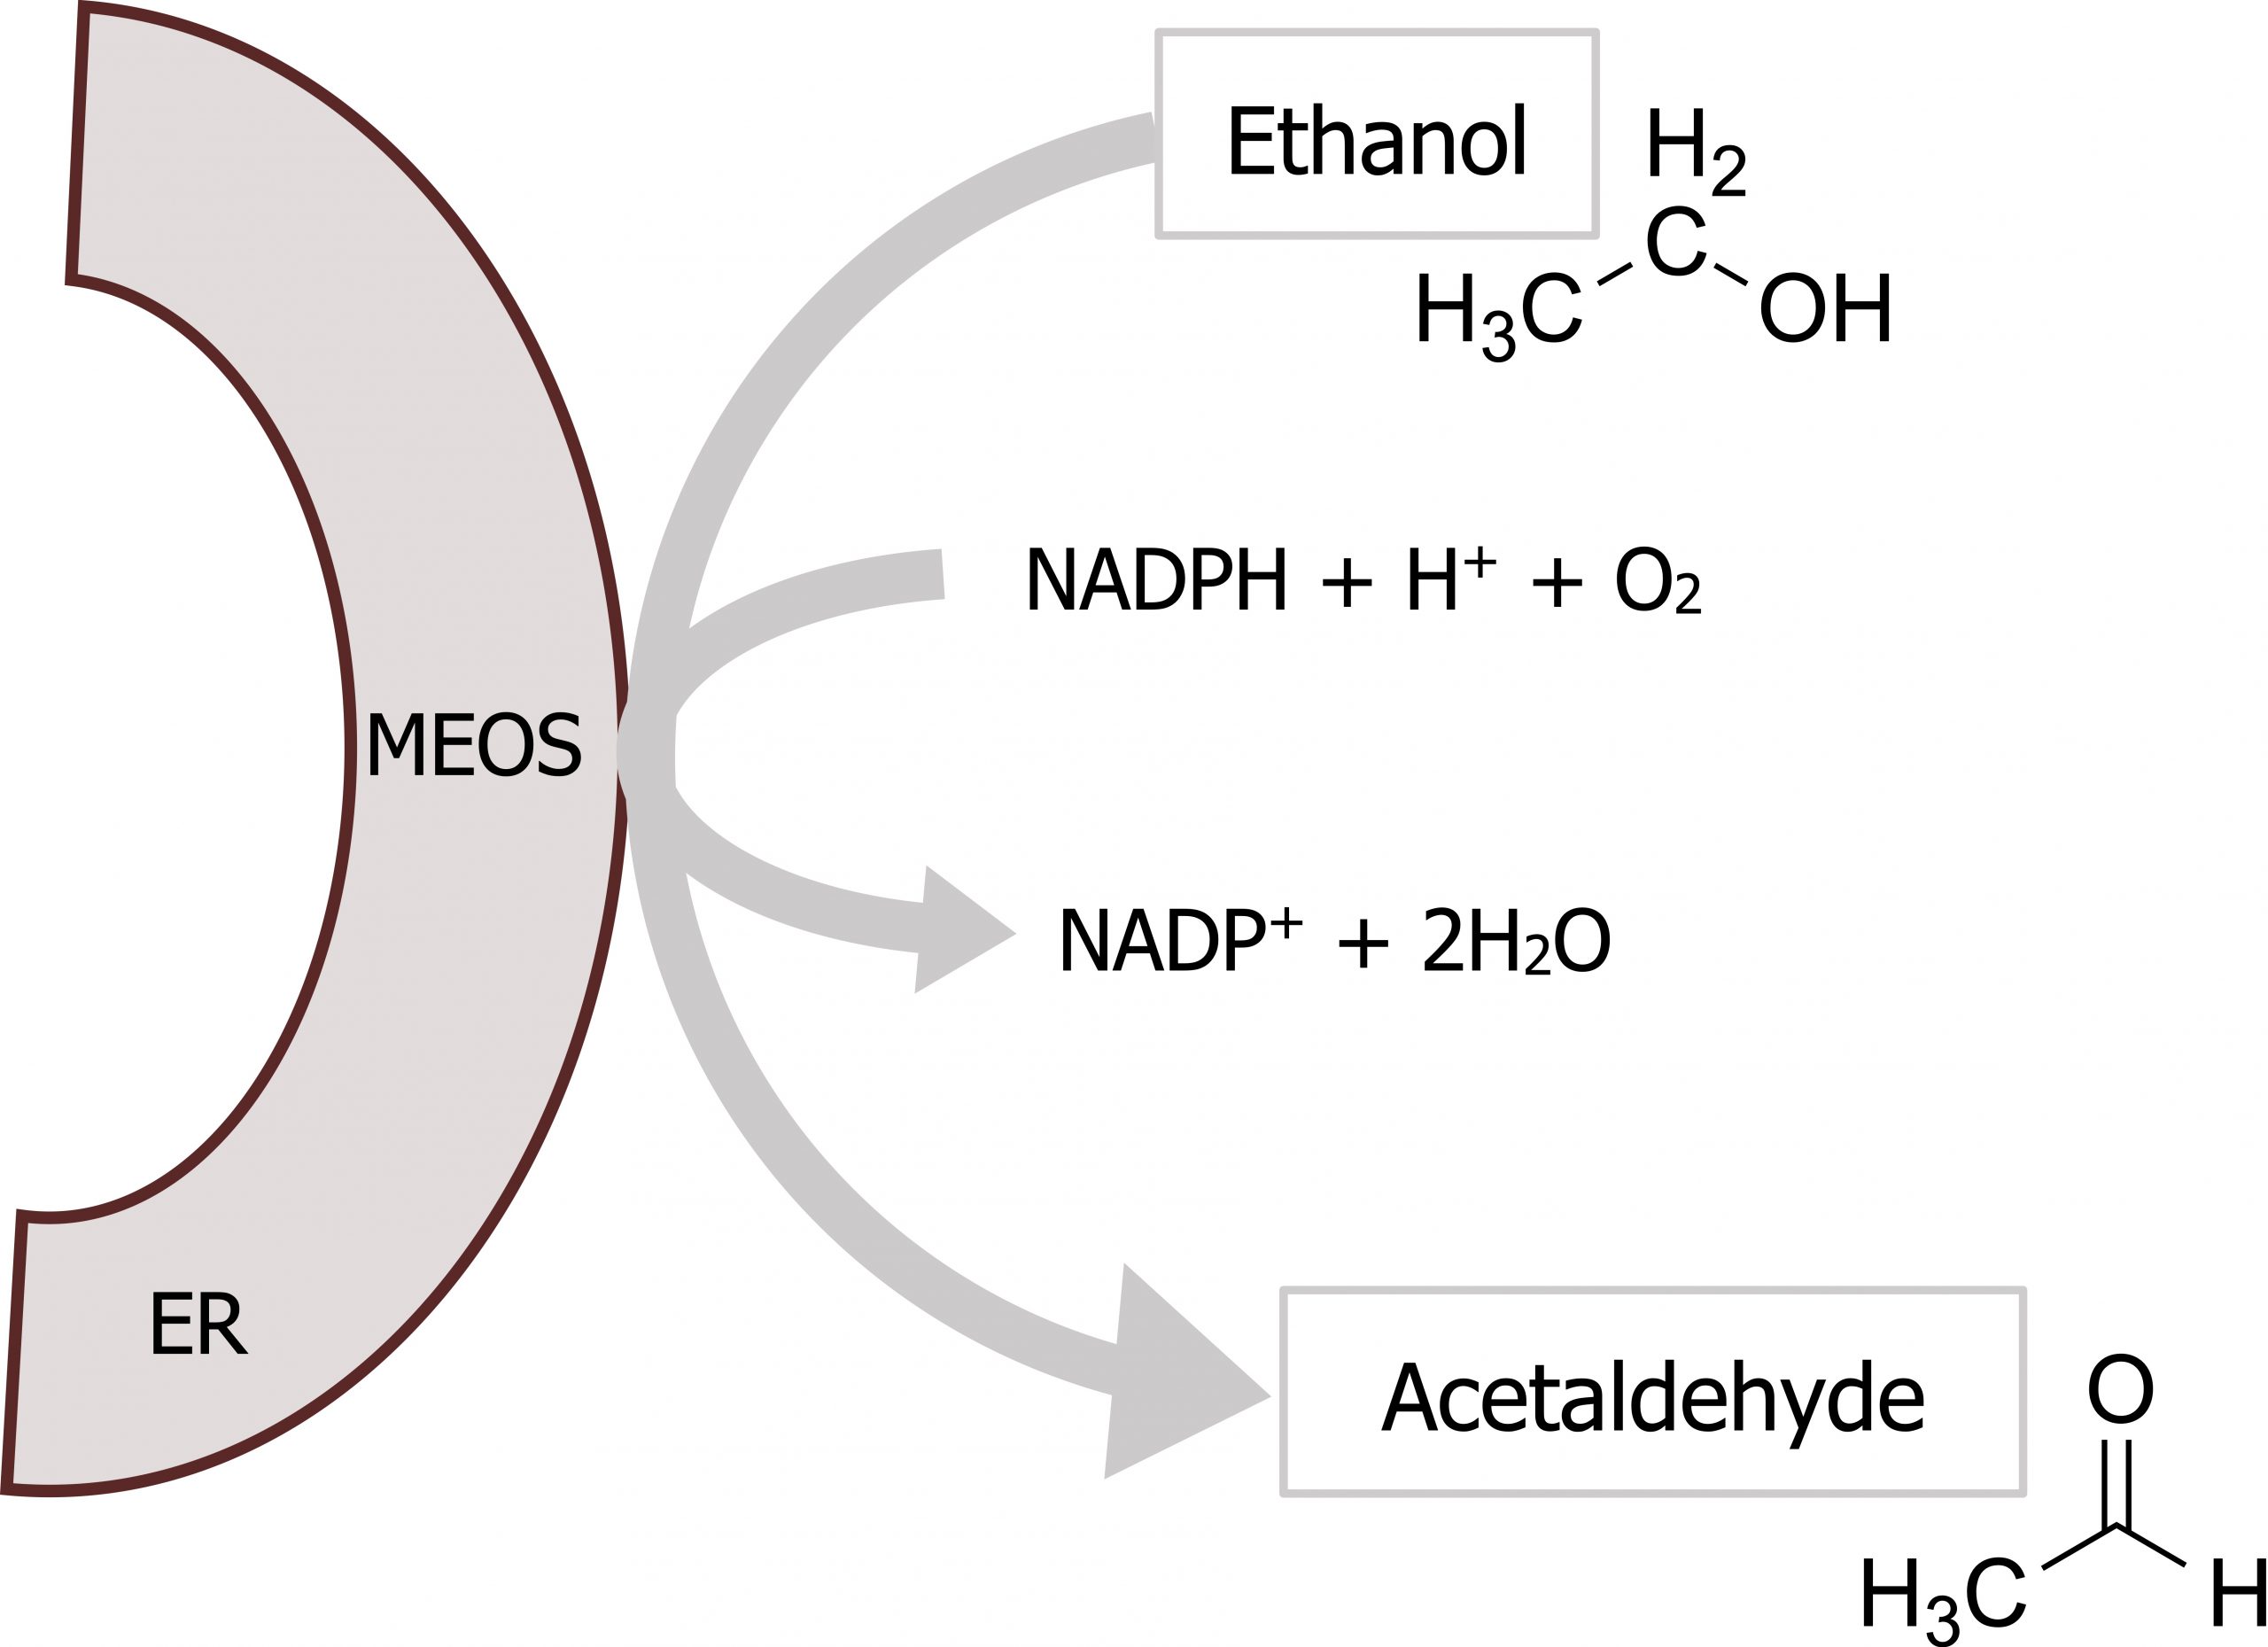 Half circle with MEOS and ER inside. Ethanol arrow touching half circle to acetaldehyde. On the arrow, NADPH + H+ + O2 arrow NADP+ + 2 H2O. Ethanol H3C single bond CH2 single bond OH. Acetaldehyde H3C single bond CH double bond O.